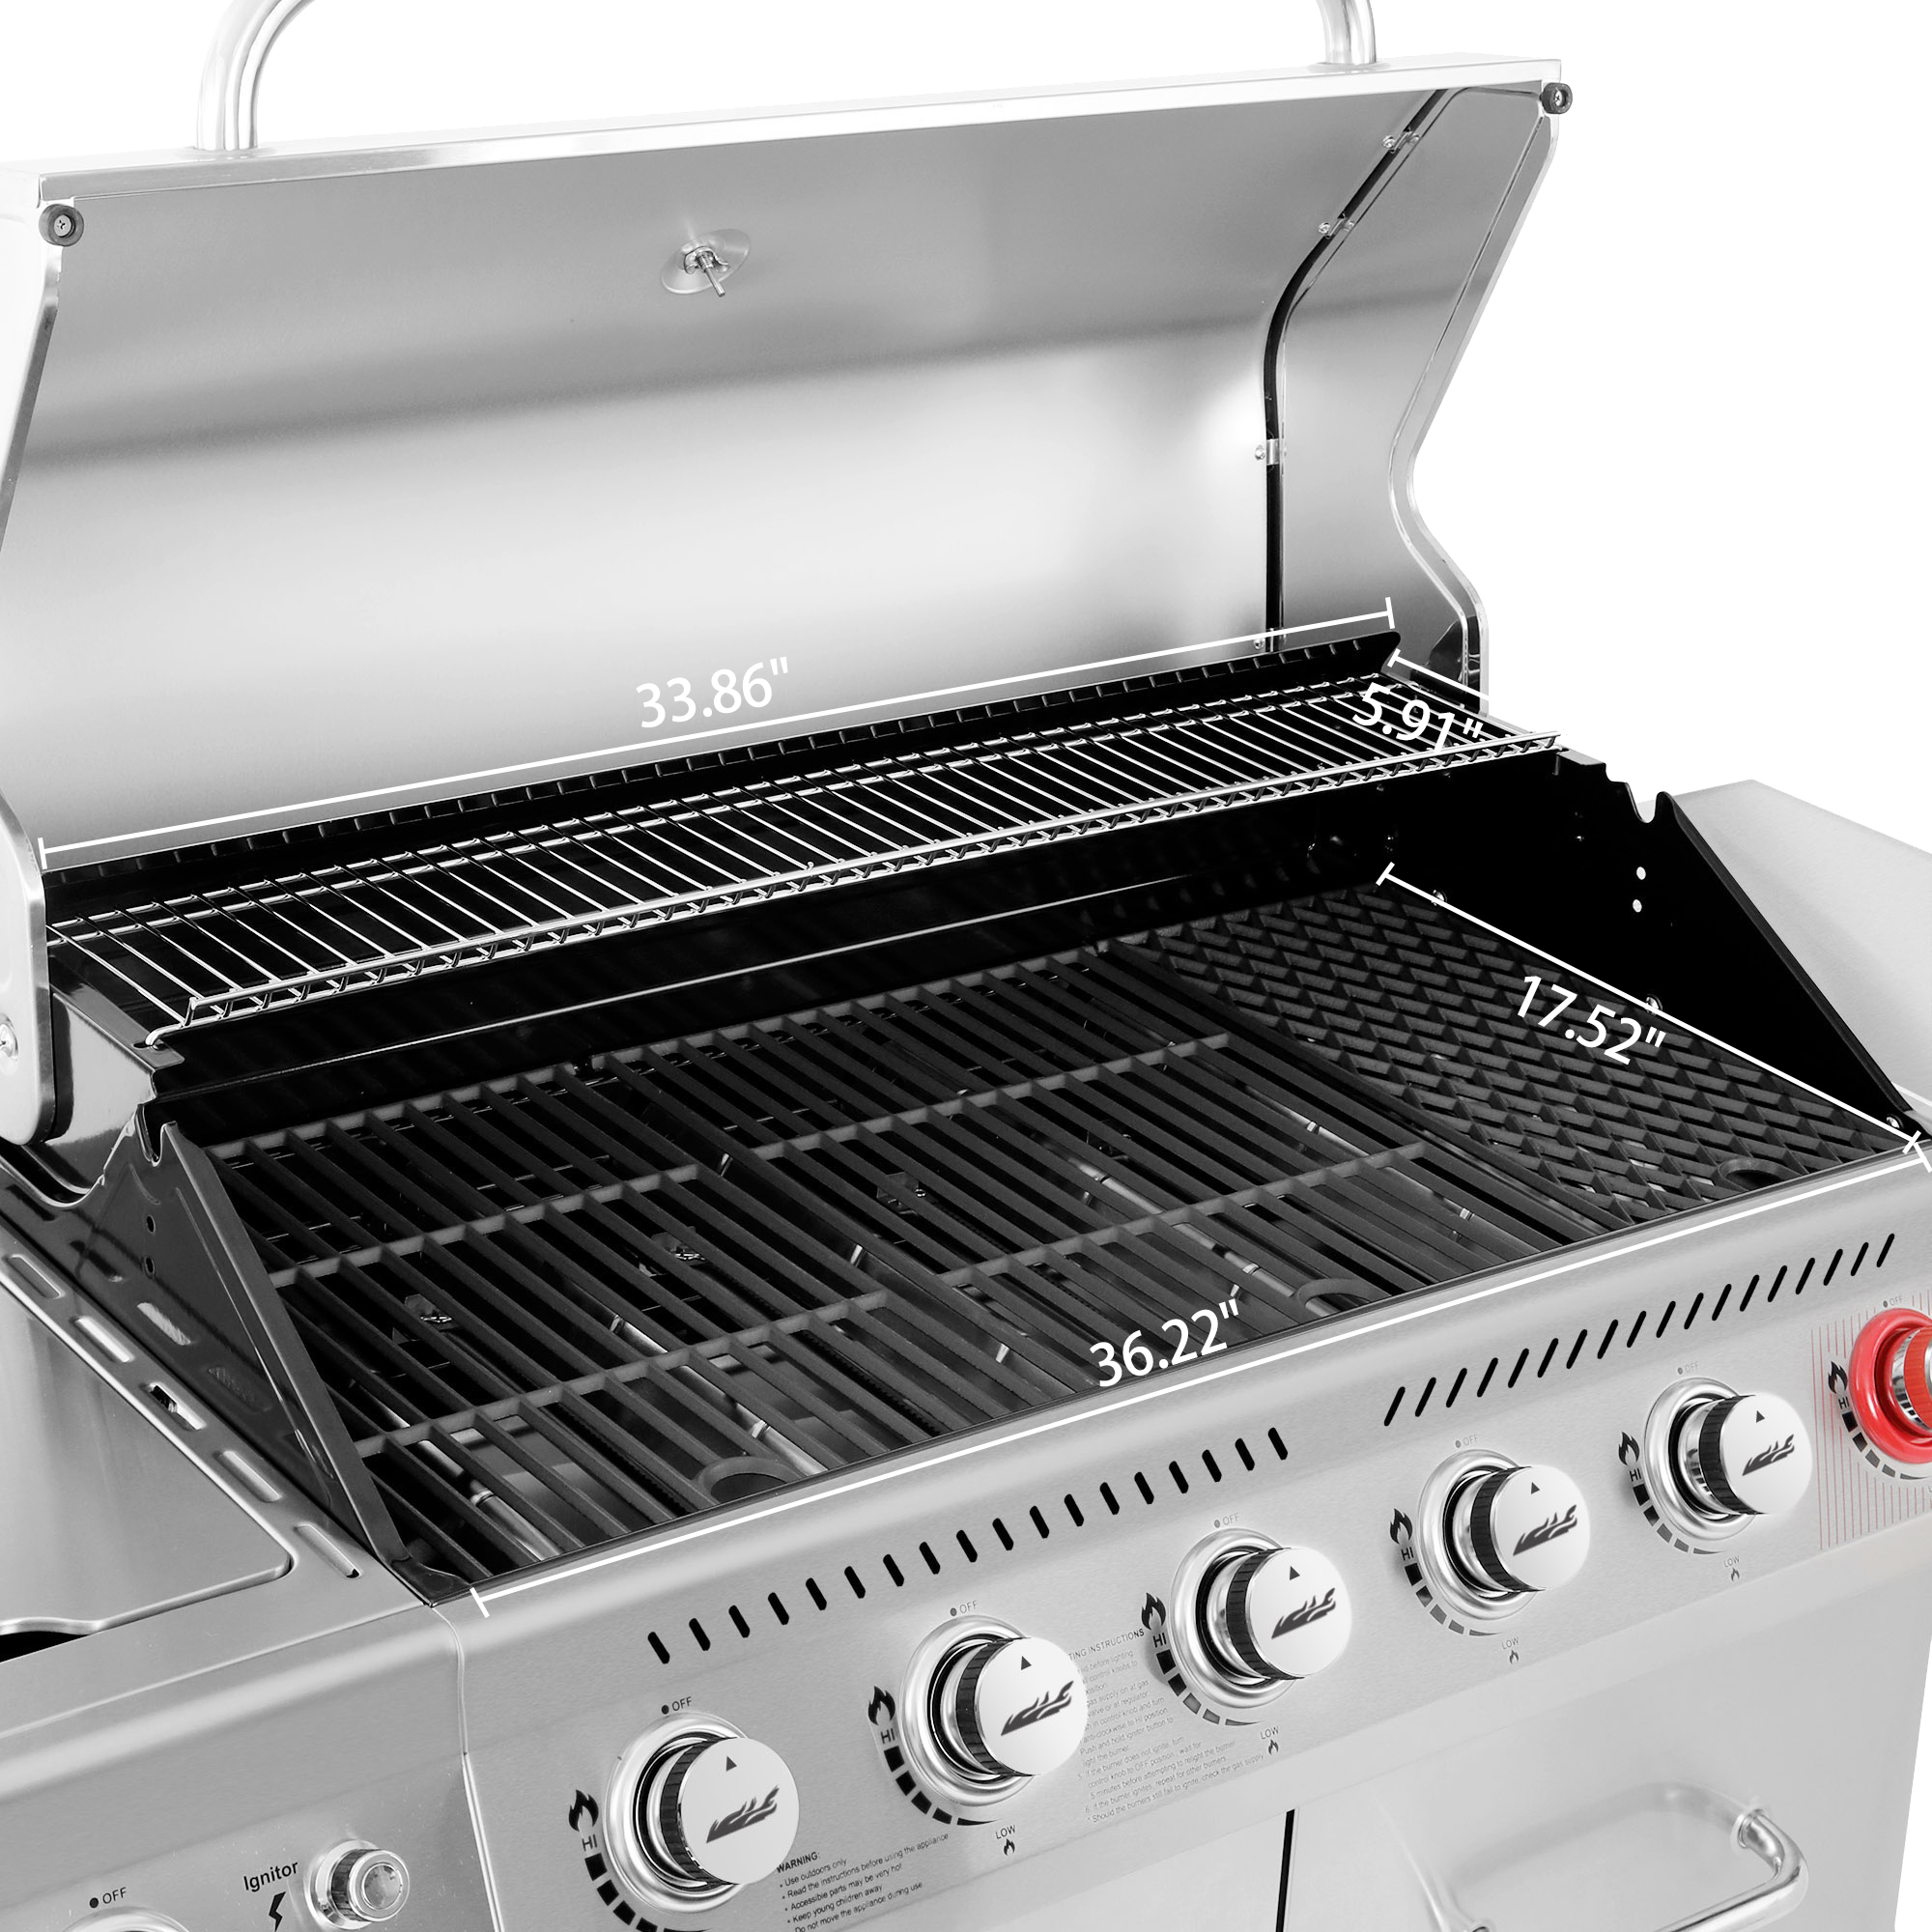 Royal Gourmet GA6402S Stainless Steel Gas Grill, Premier 6-Burner BBQ Grill with Sear Burner and Side Burner, 74,000 BTU, Cabinet Style, Outdoor Party Grill, Silver - image 4 of 9